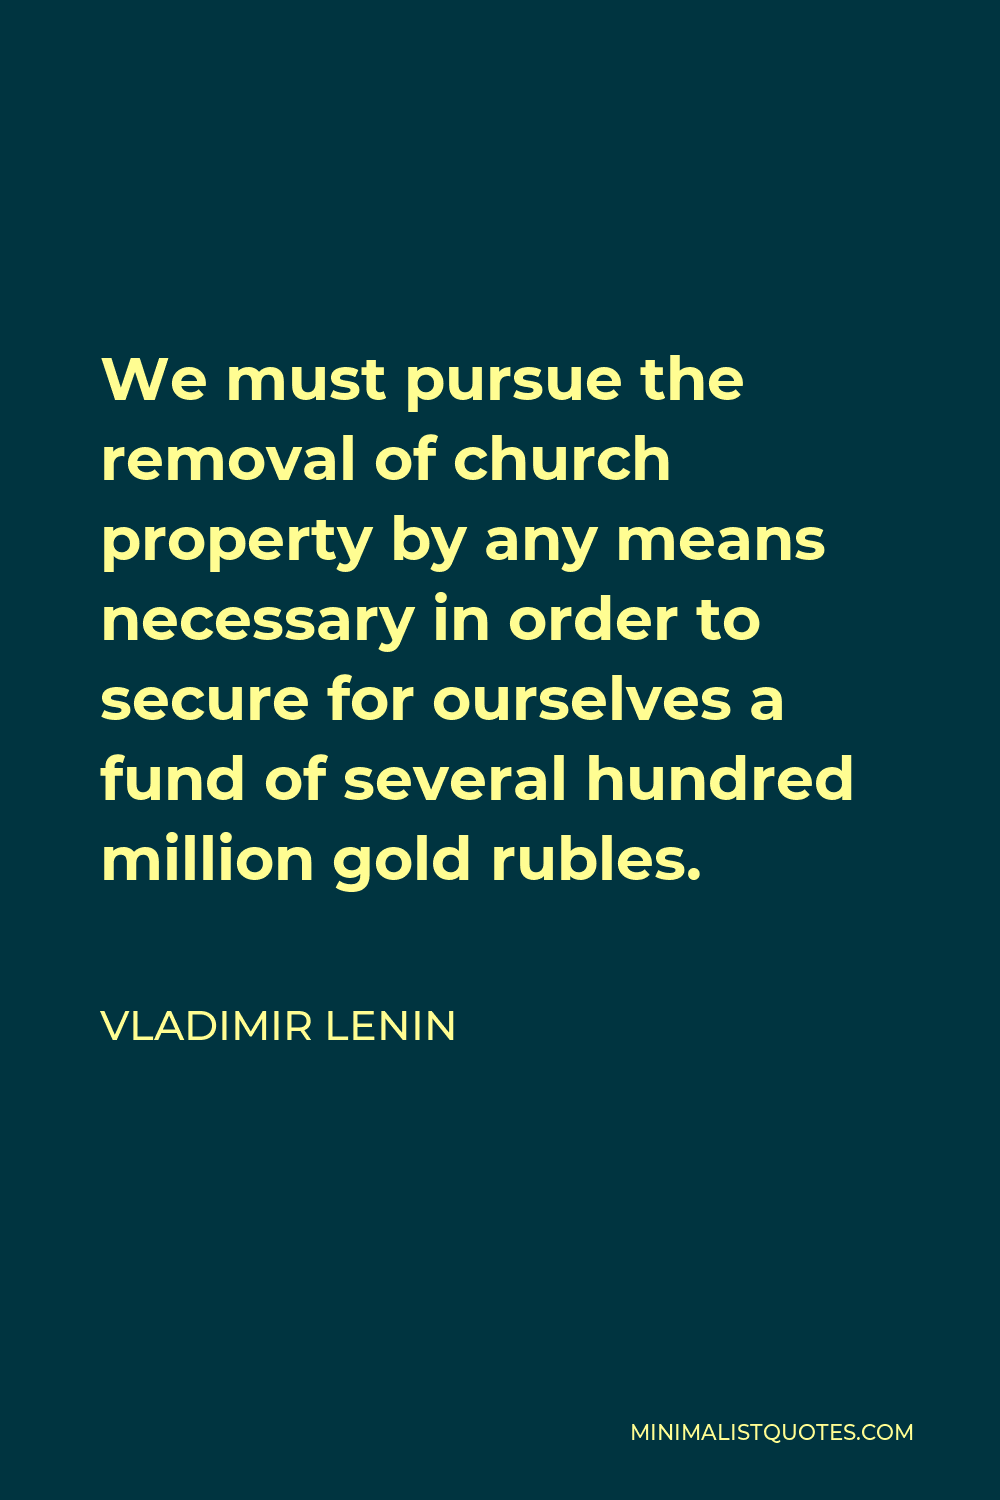 Vladimir Lenin Quote - We must pursue the removal of church property by any means necessary in order to secure for ourselves a fund of several hundred million gold rubles.